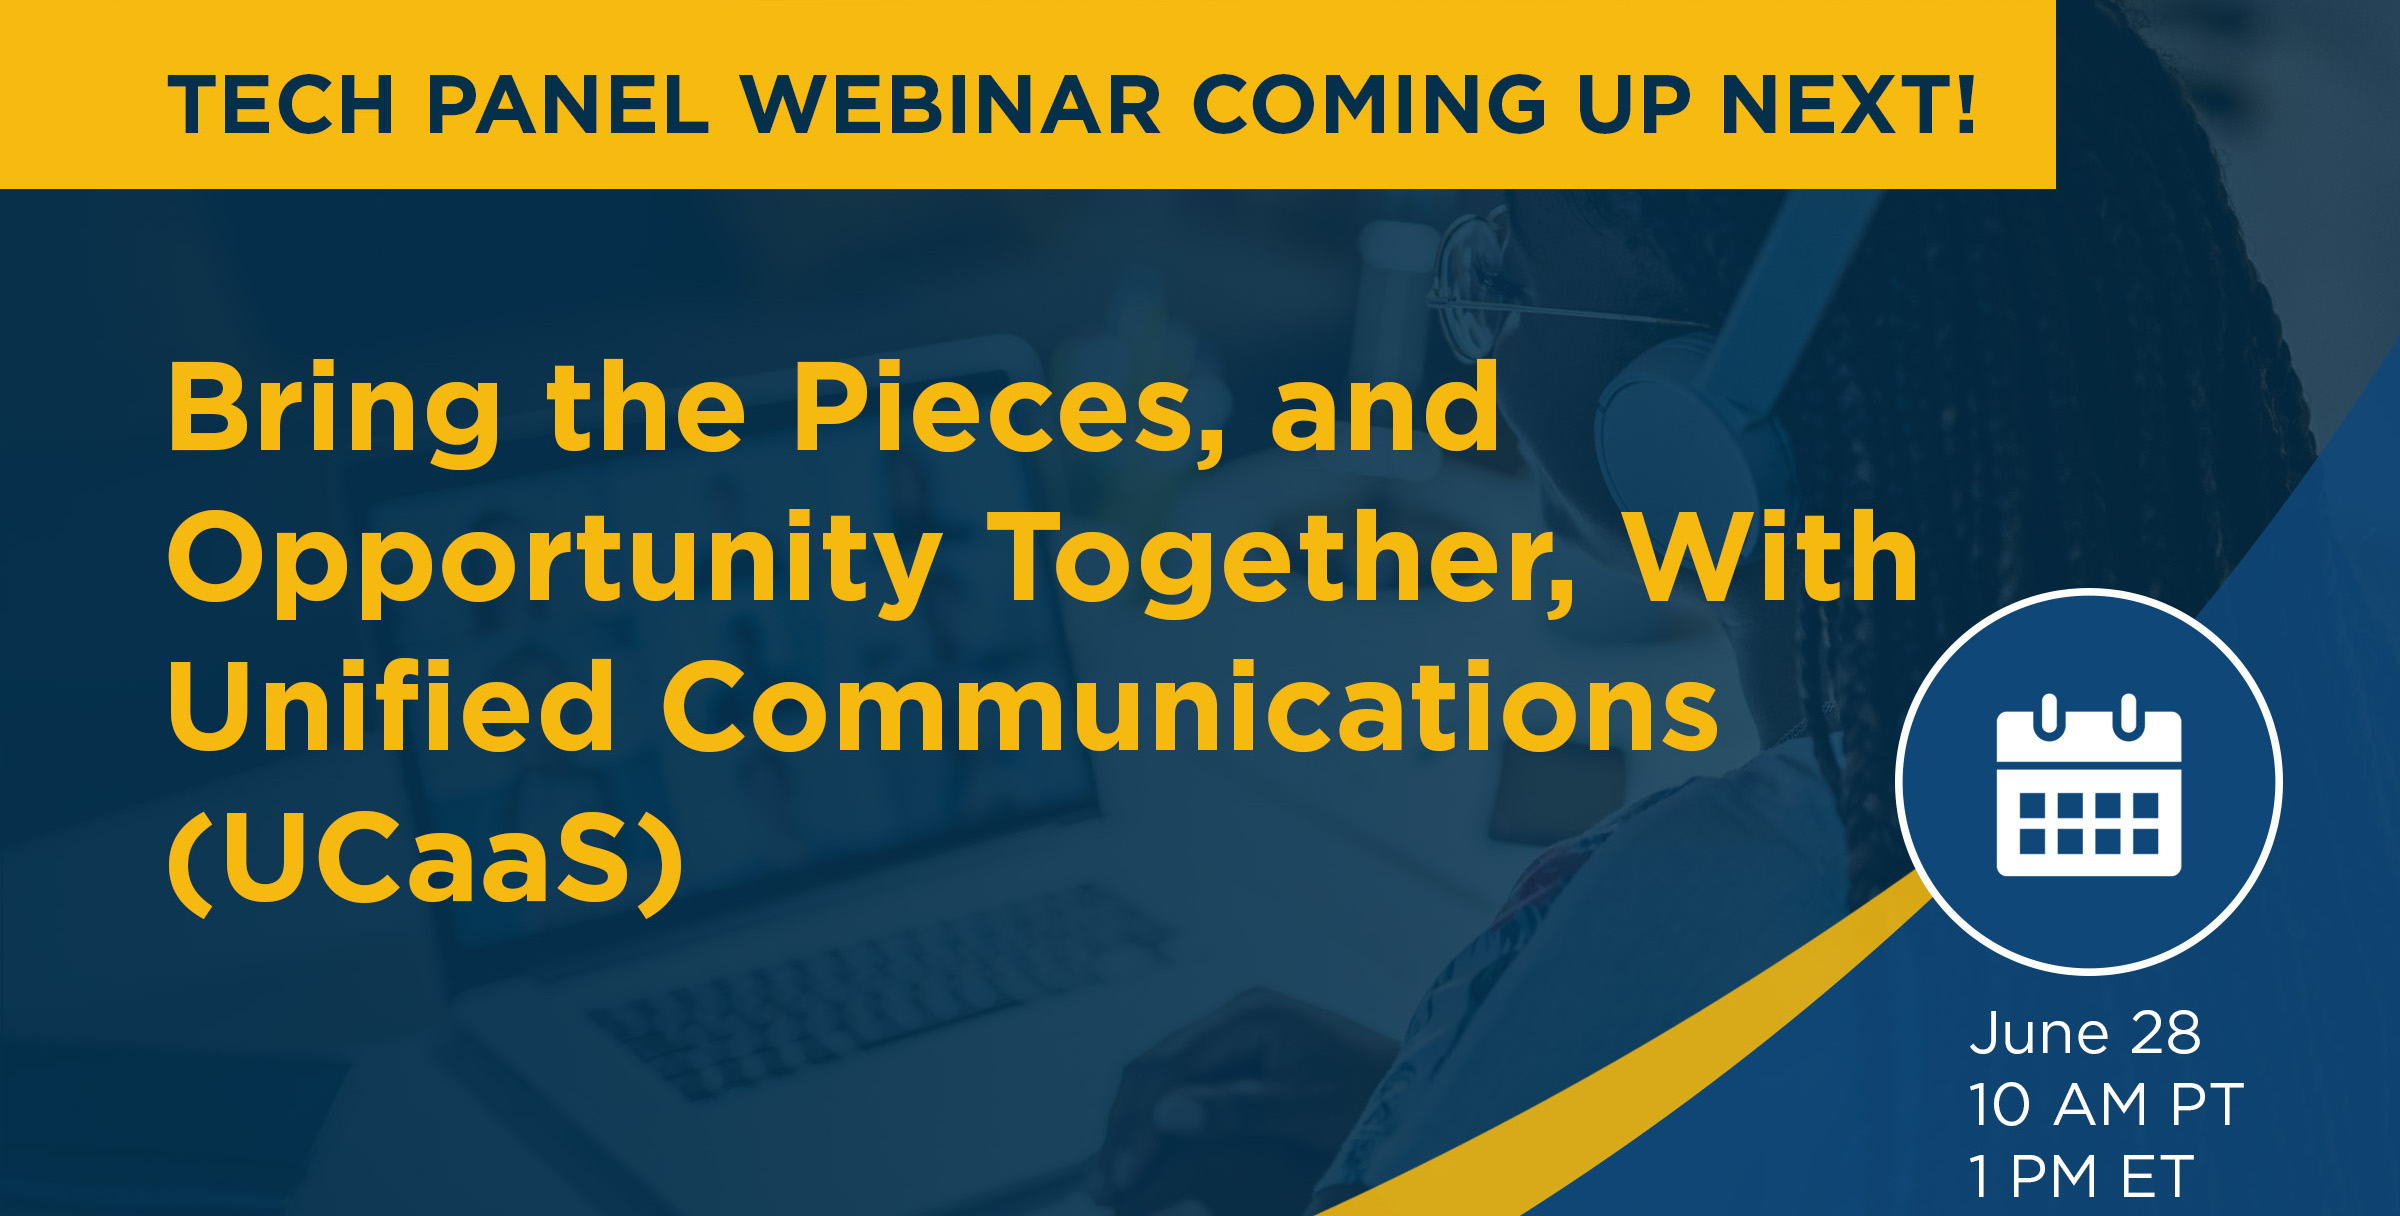 Bring the Pieces, and Opportunity Together, With Unified Communications (UCaaS)